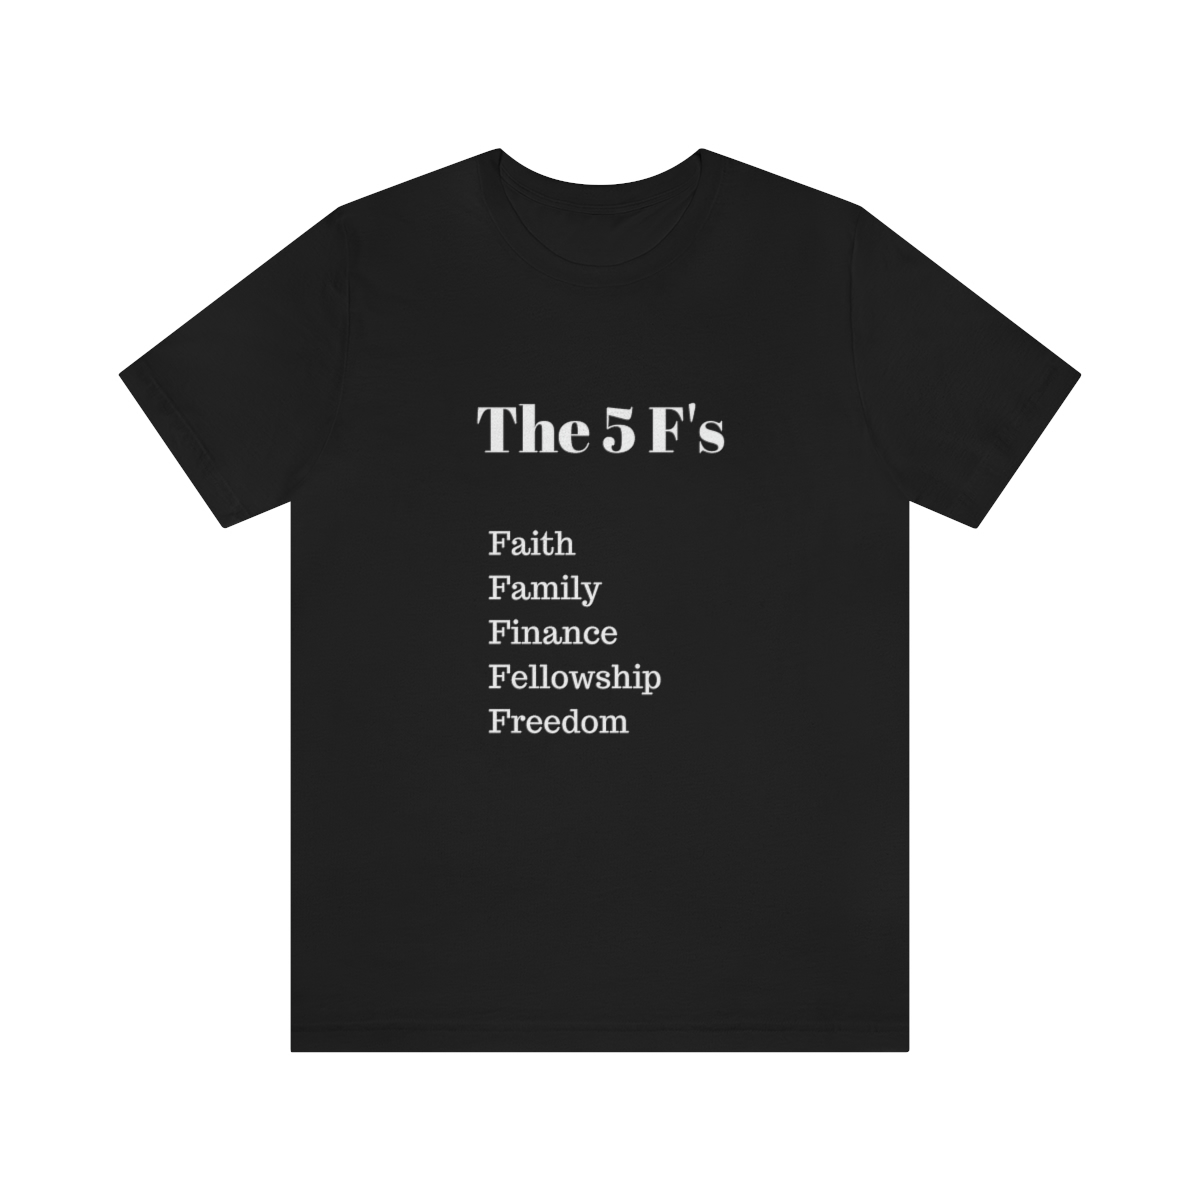 The 5 F’s shirt